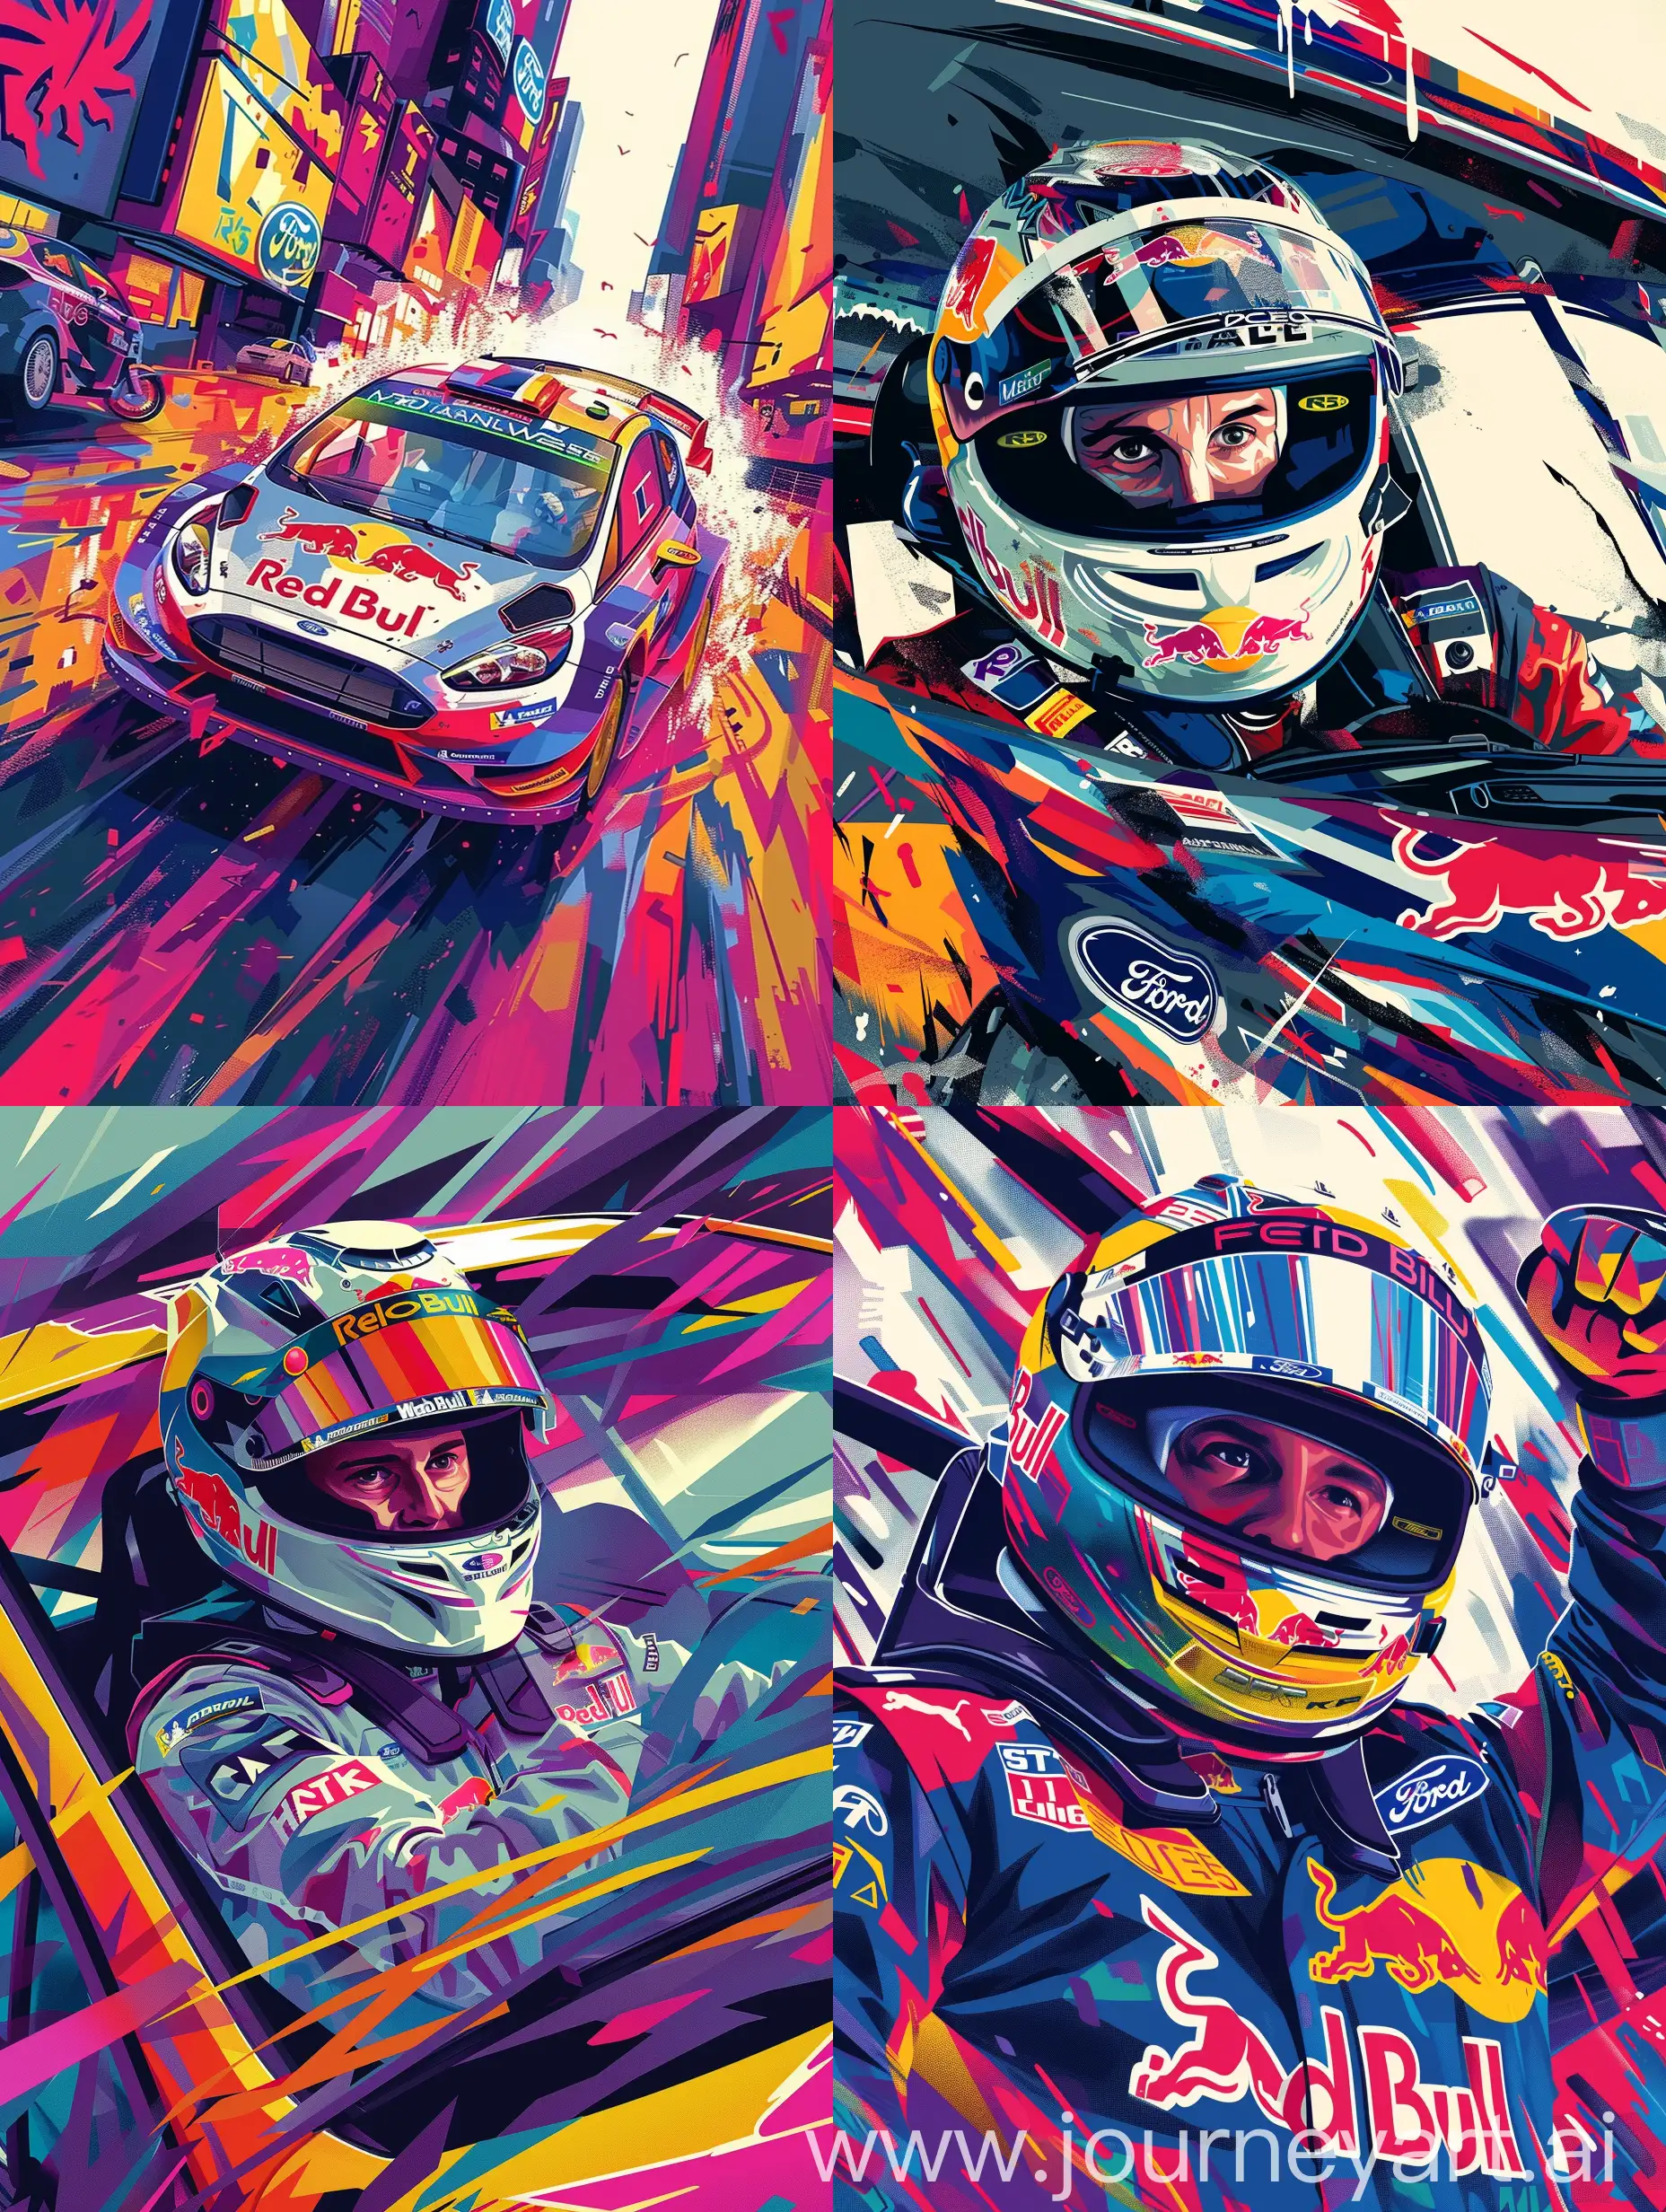 a rally driver driving a ford fiesta r5 in a city rally stage, with his co driver besides him, voth wearing a full face helmet and a racing suit both with a red bull livery, with a fearful eye, in a colorful style